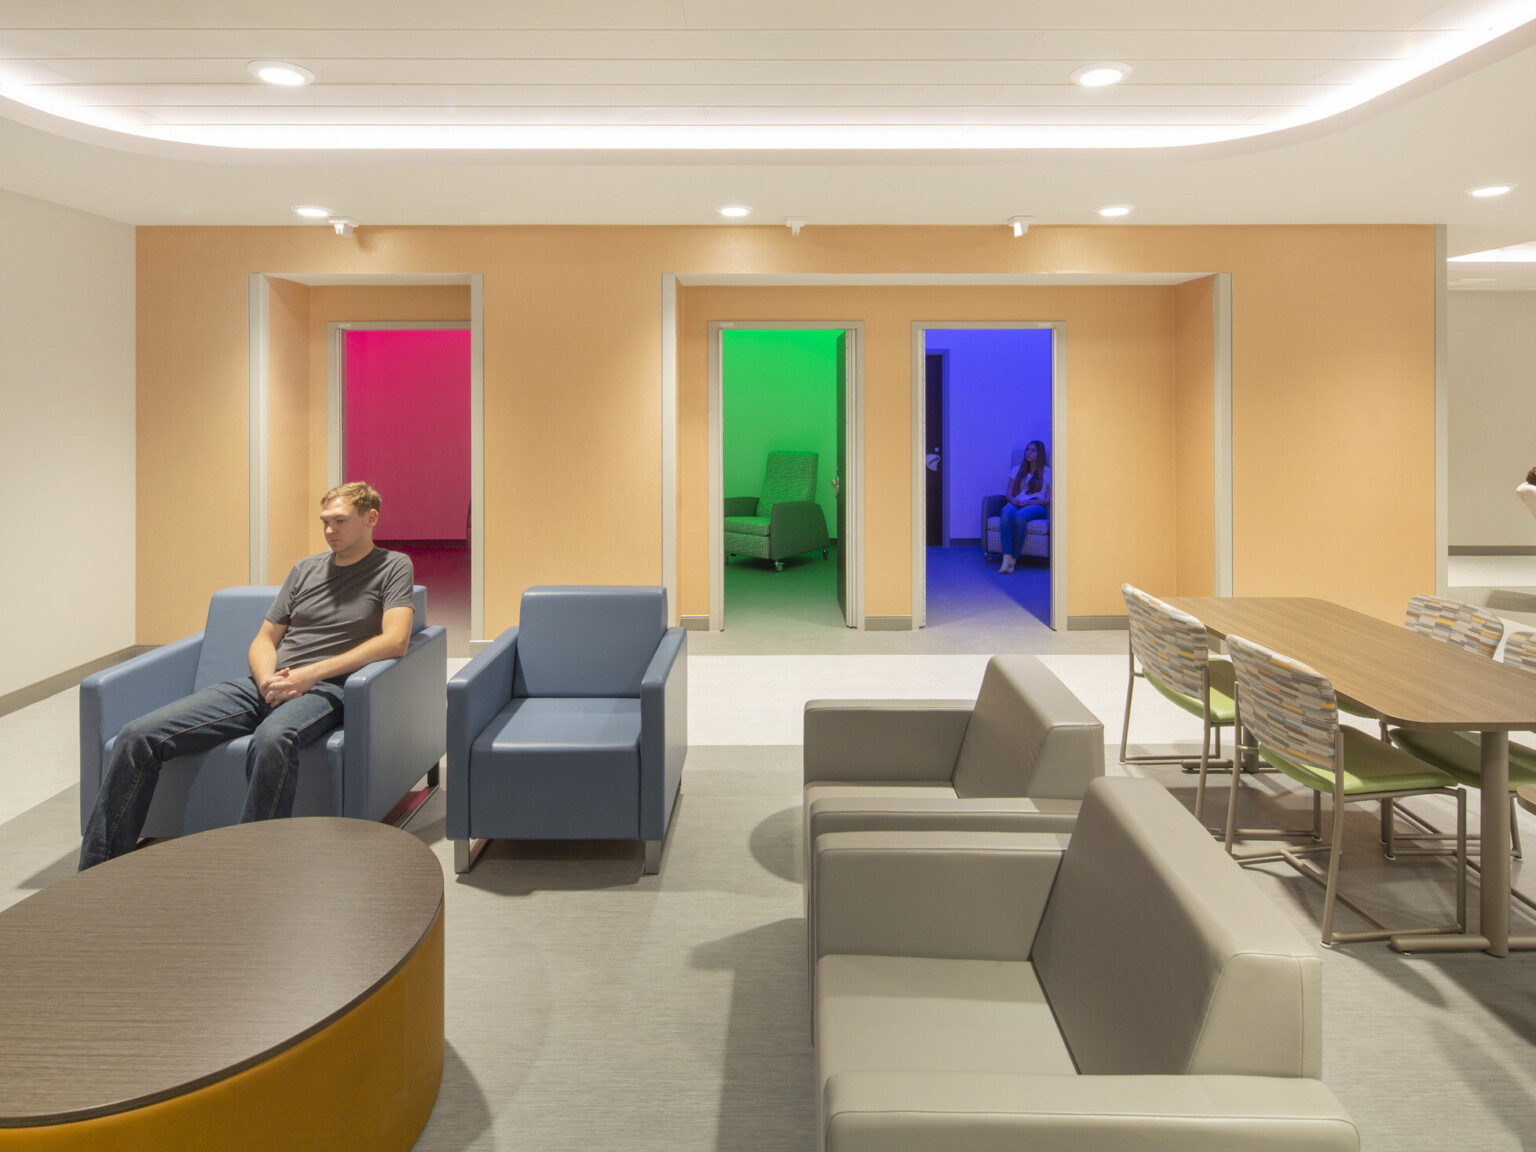 Nebraska Medicine Psychiatric Emergency Services Unit interior reception area, person sit in a recliner in front of treatment rooms that utilize color light therapy in red, green and blue colors